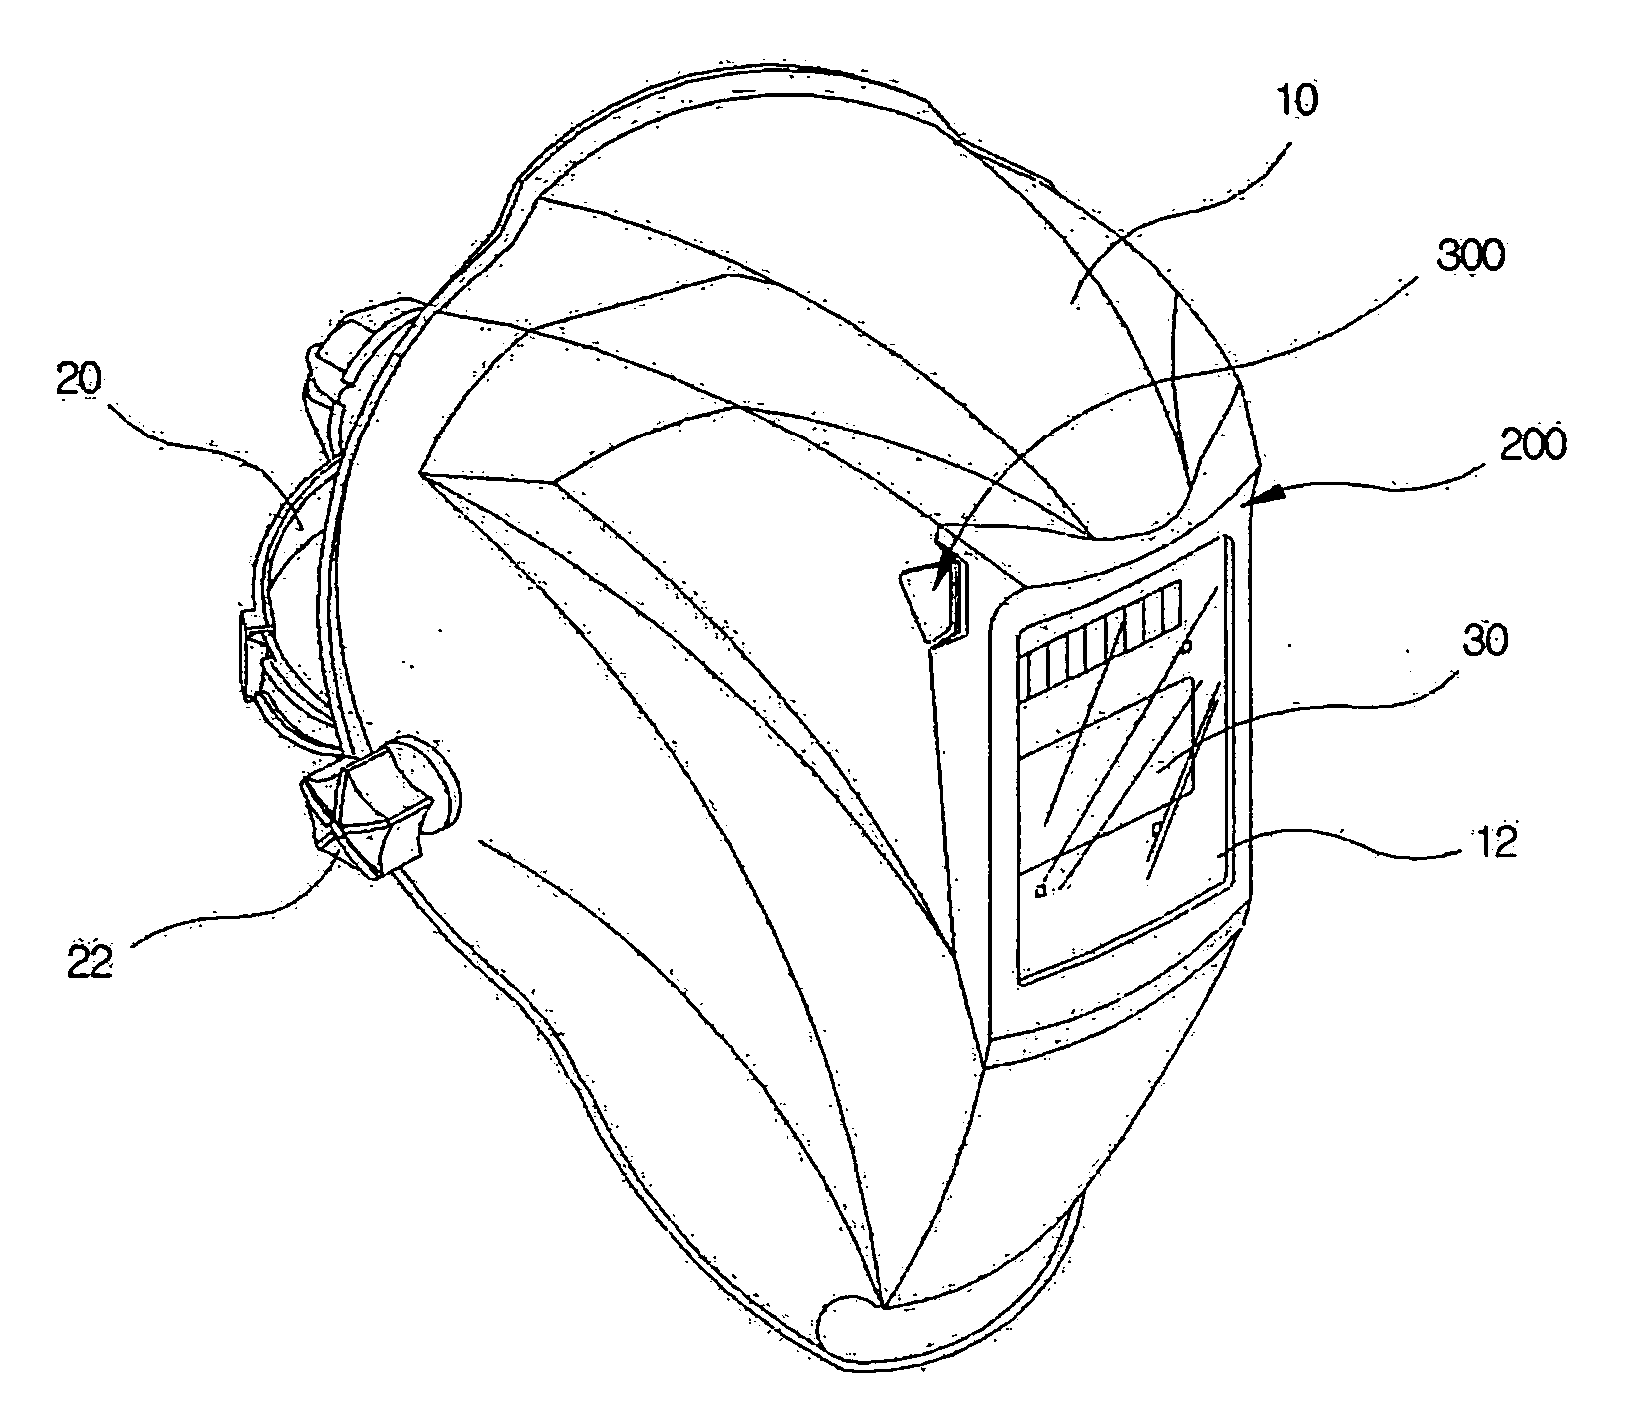 Front surface opened welding mask